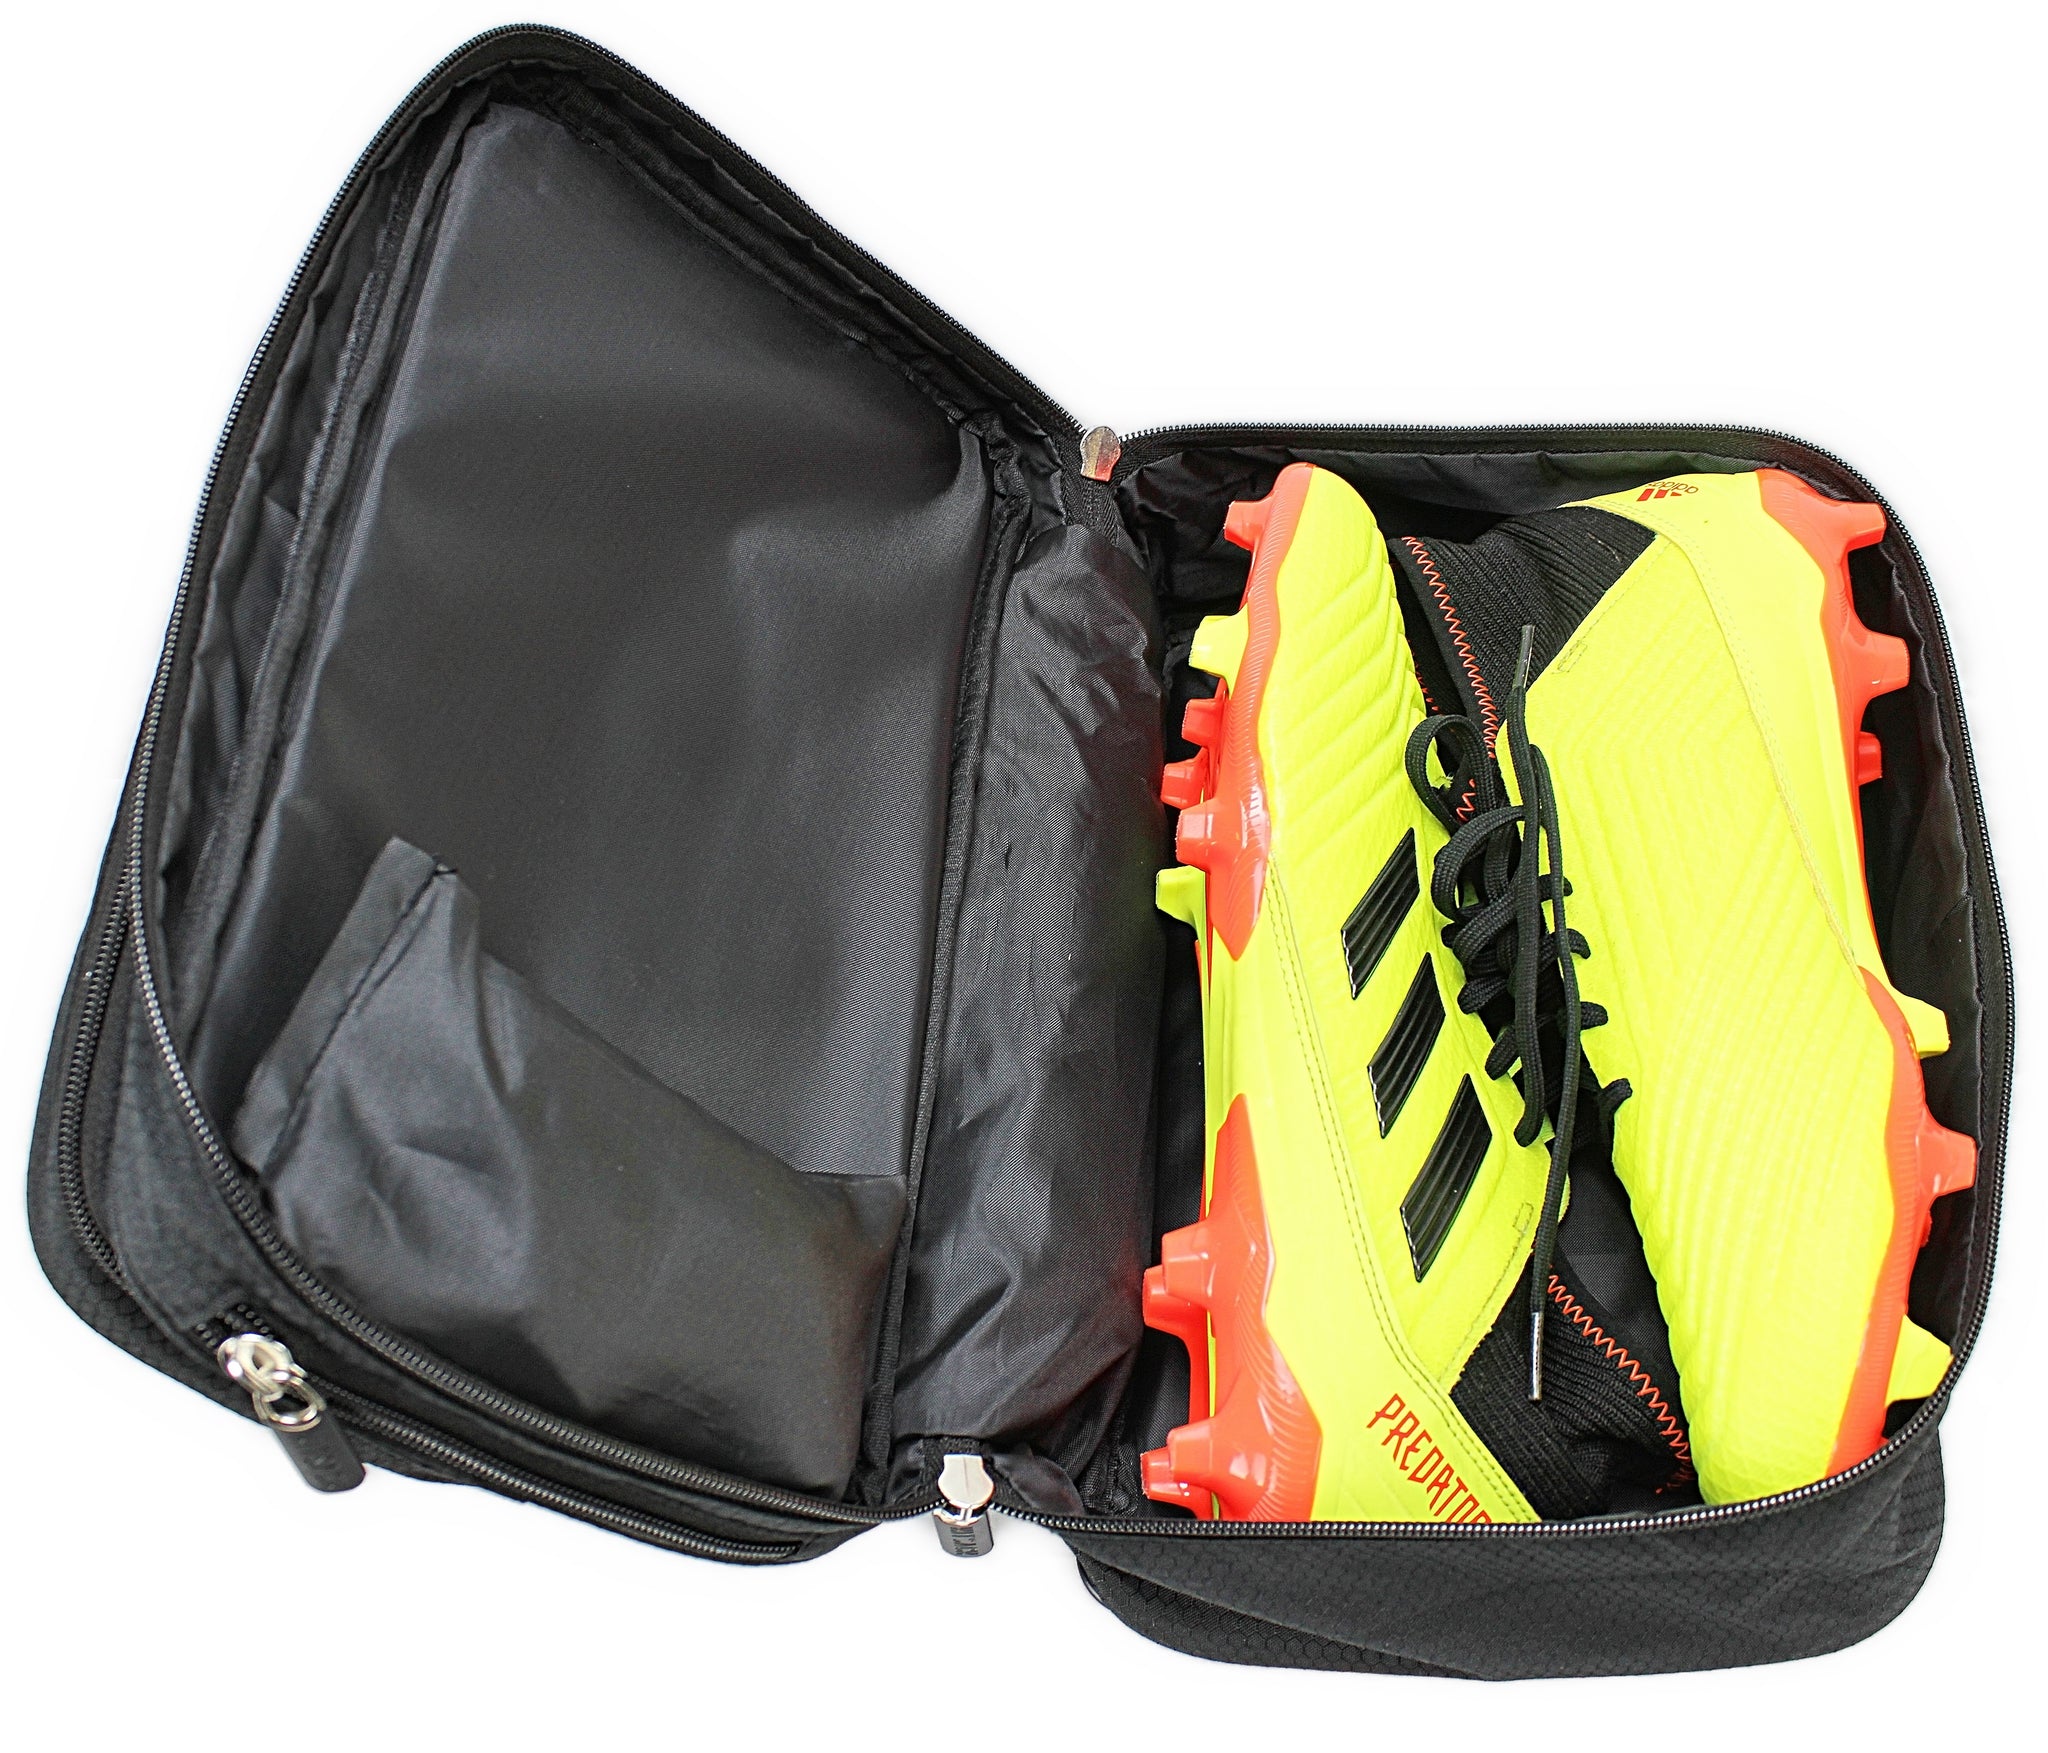 KITSACK Football and Rugby training bag, carry your boots, gloves, shin pads, ball and all your training gear in one bag